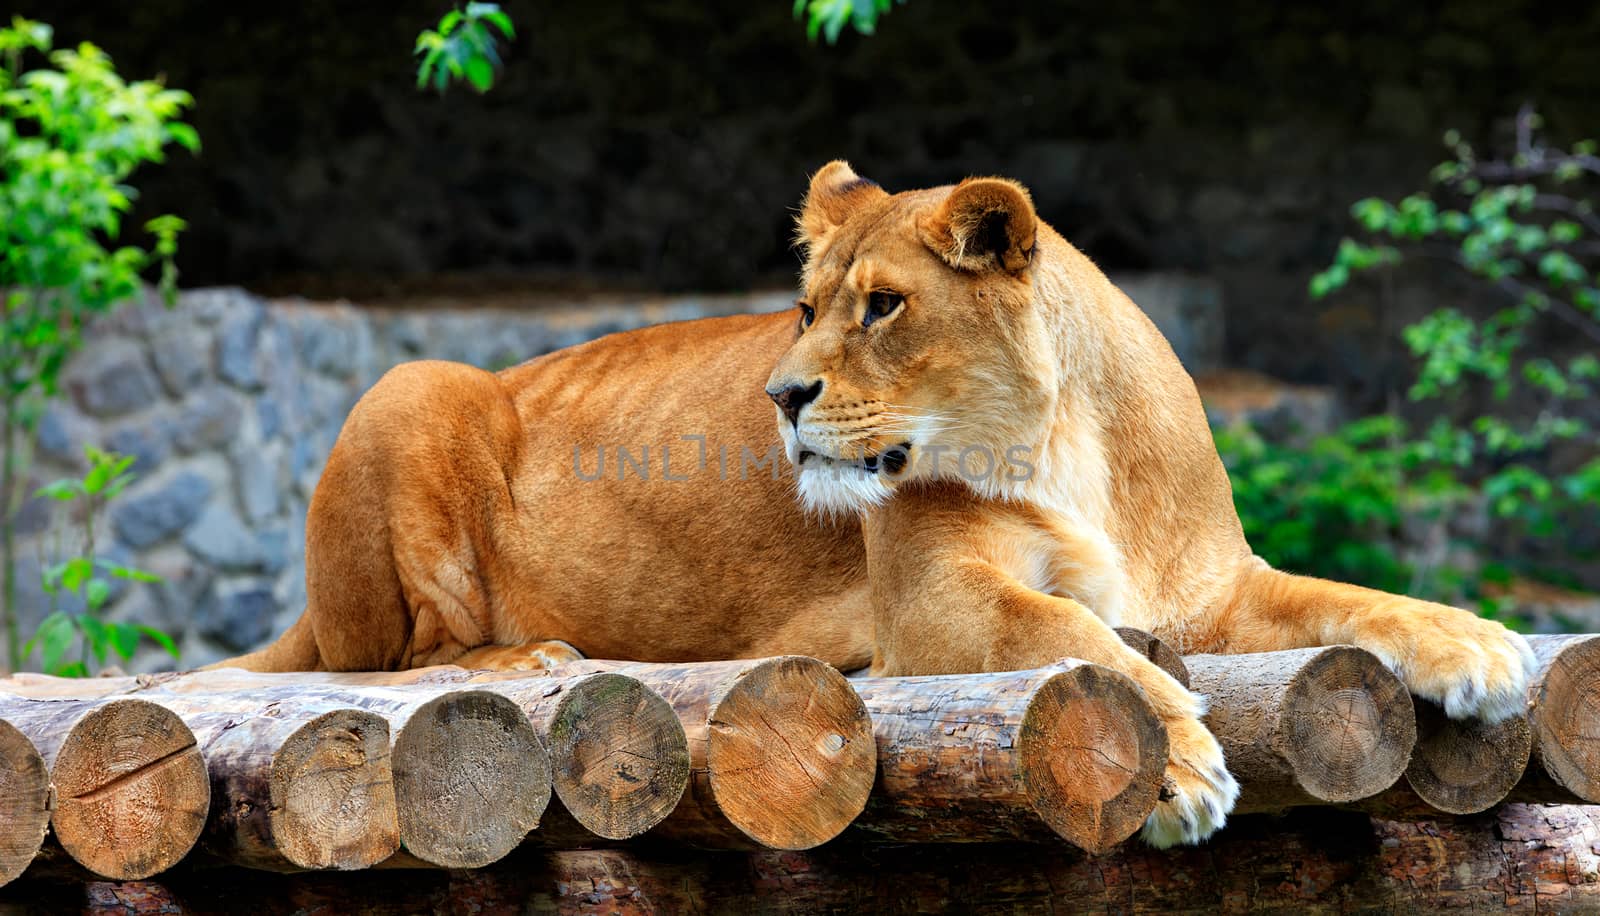 The majestic lioness is resting on a platform of wooden logs. by Sergii